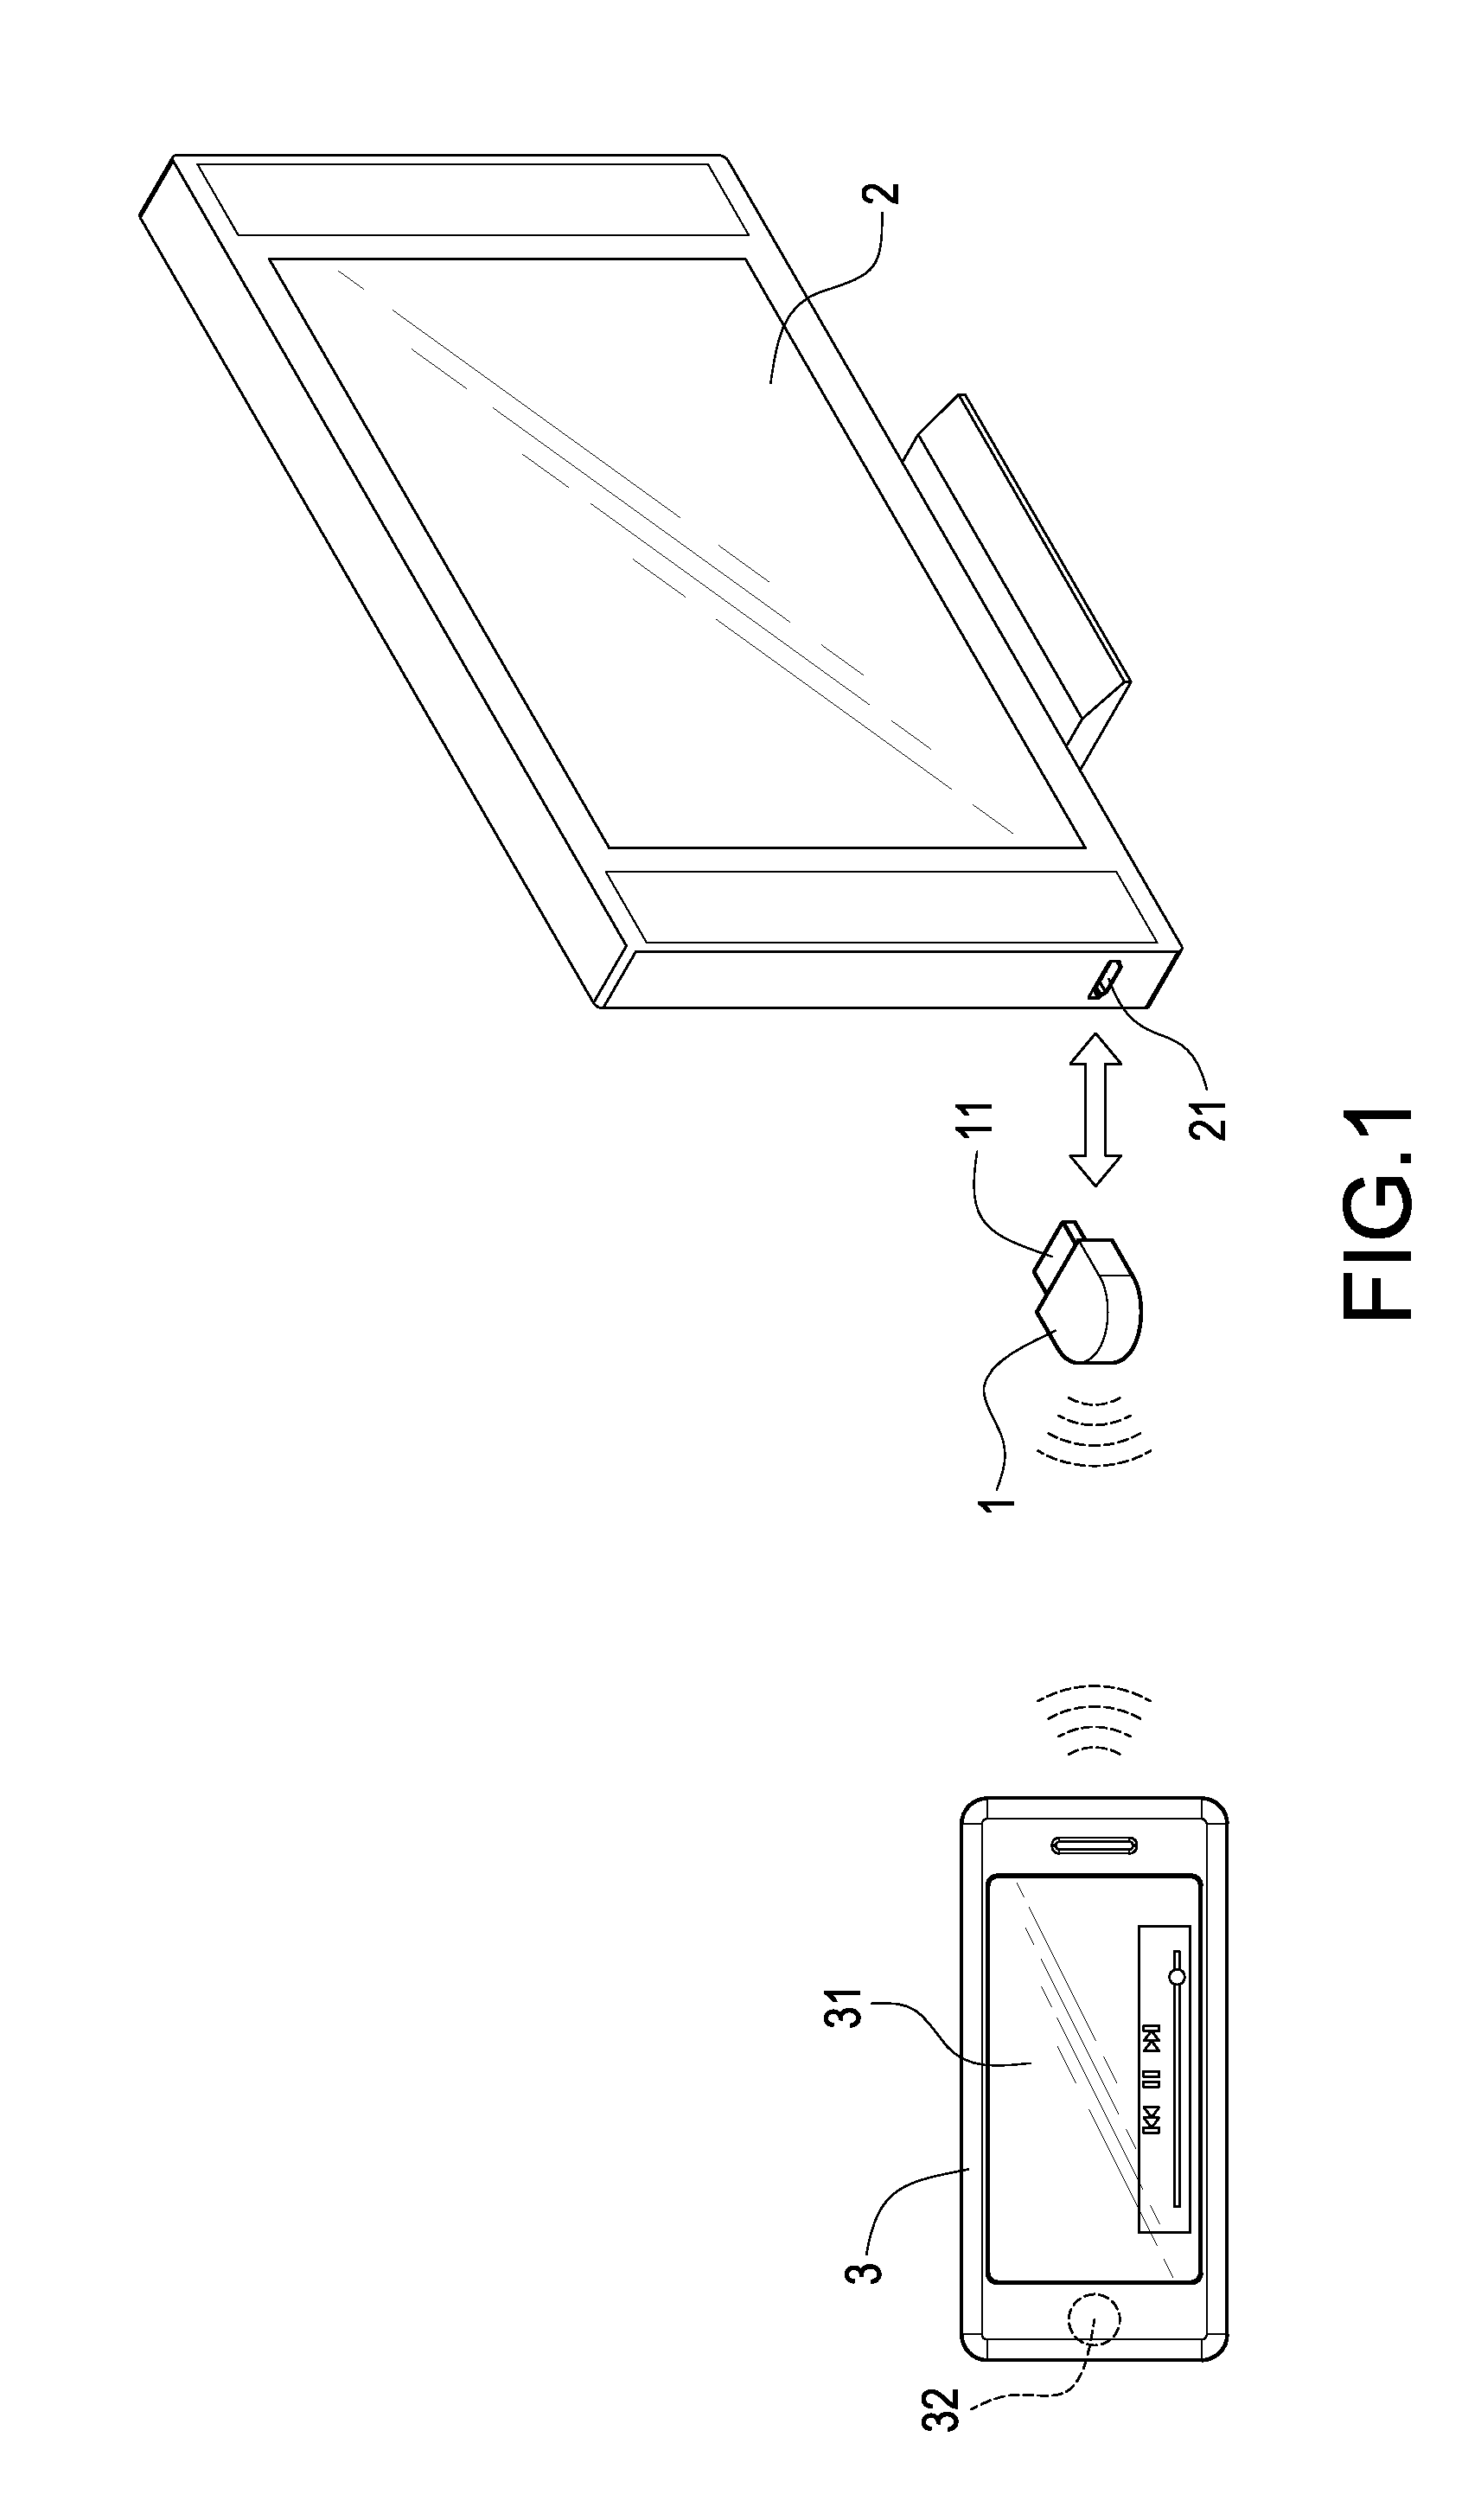 Data transmission device, system and method using the same